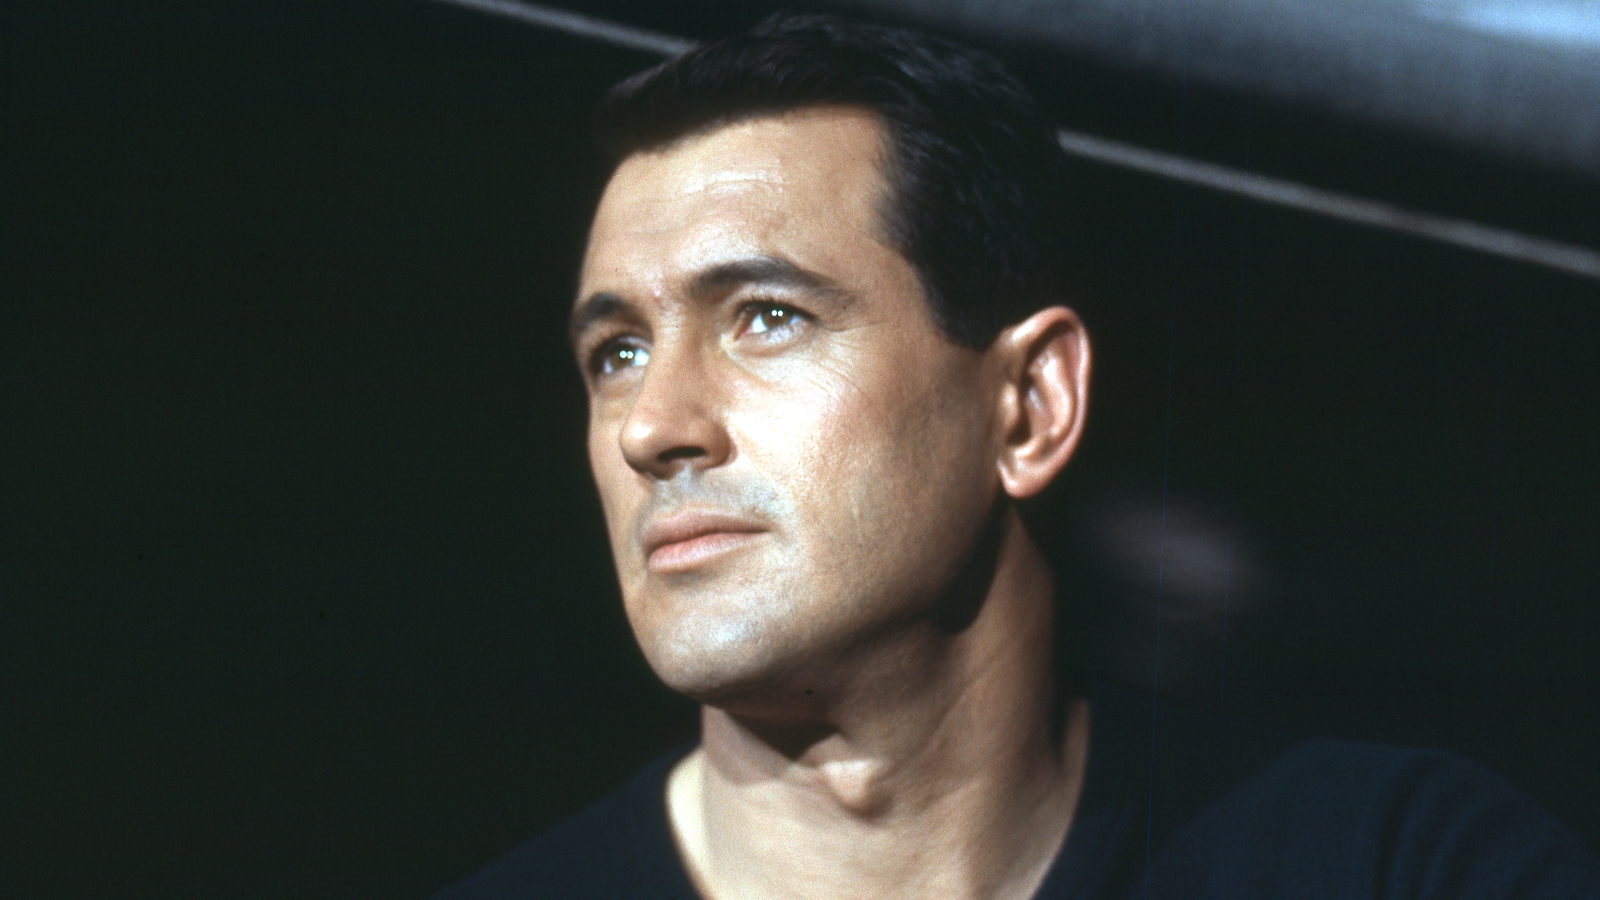 Documentary Director: Rock Hudson Didn't See 'Point' in Coming Out